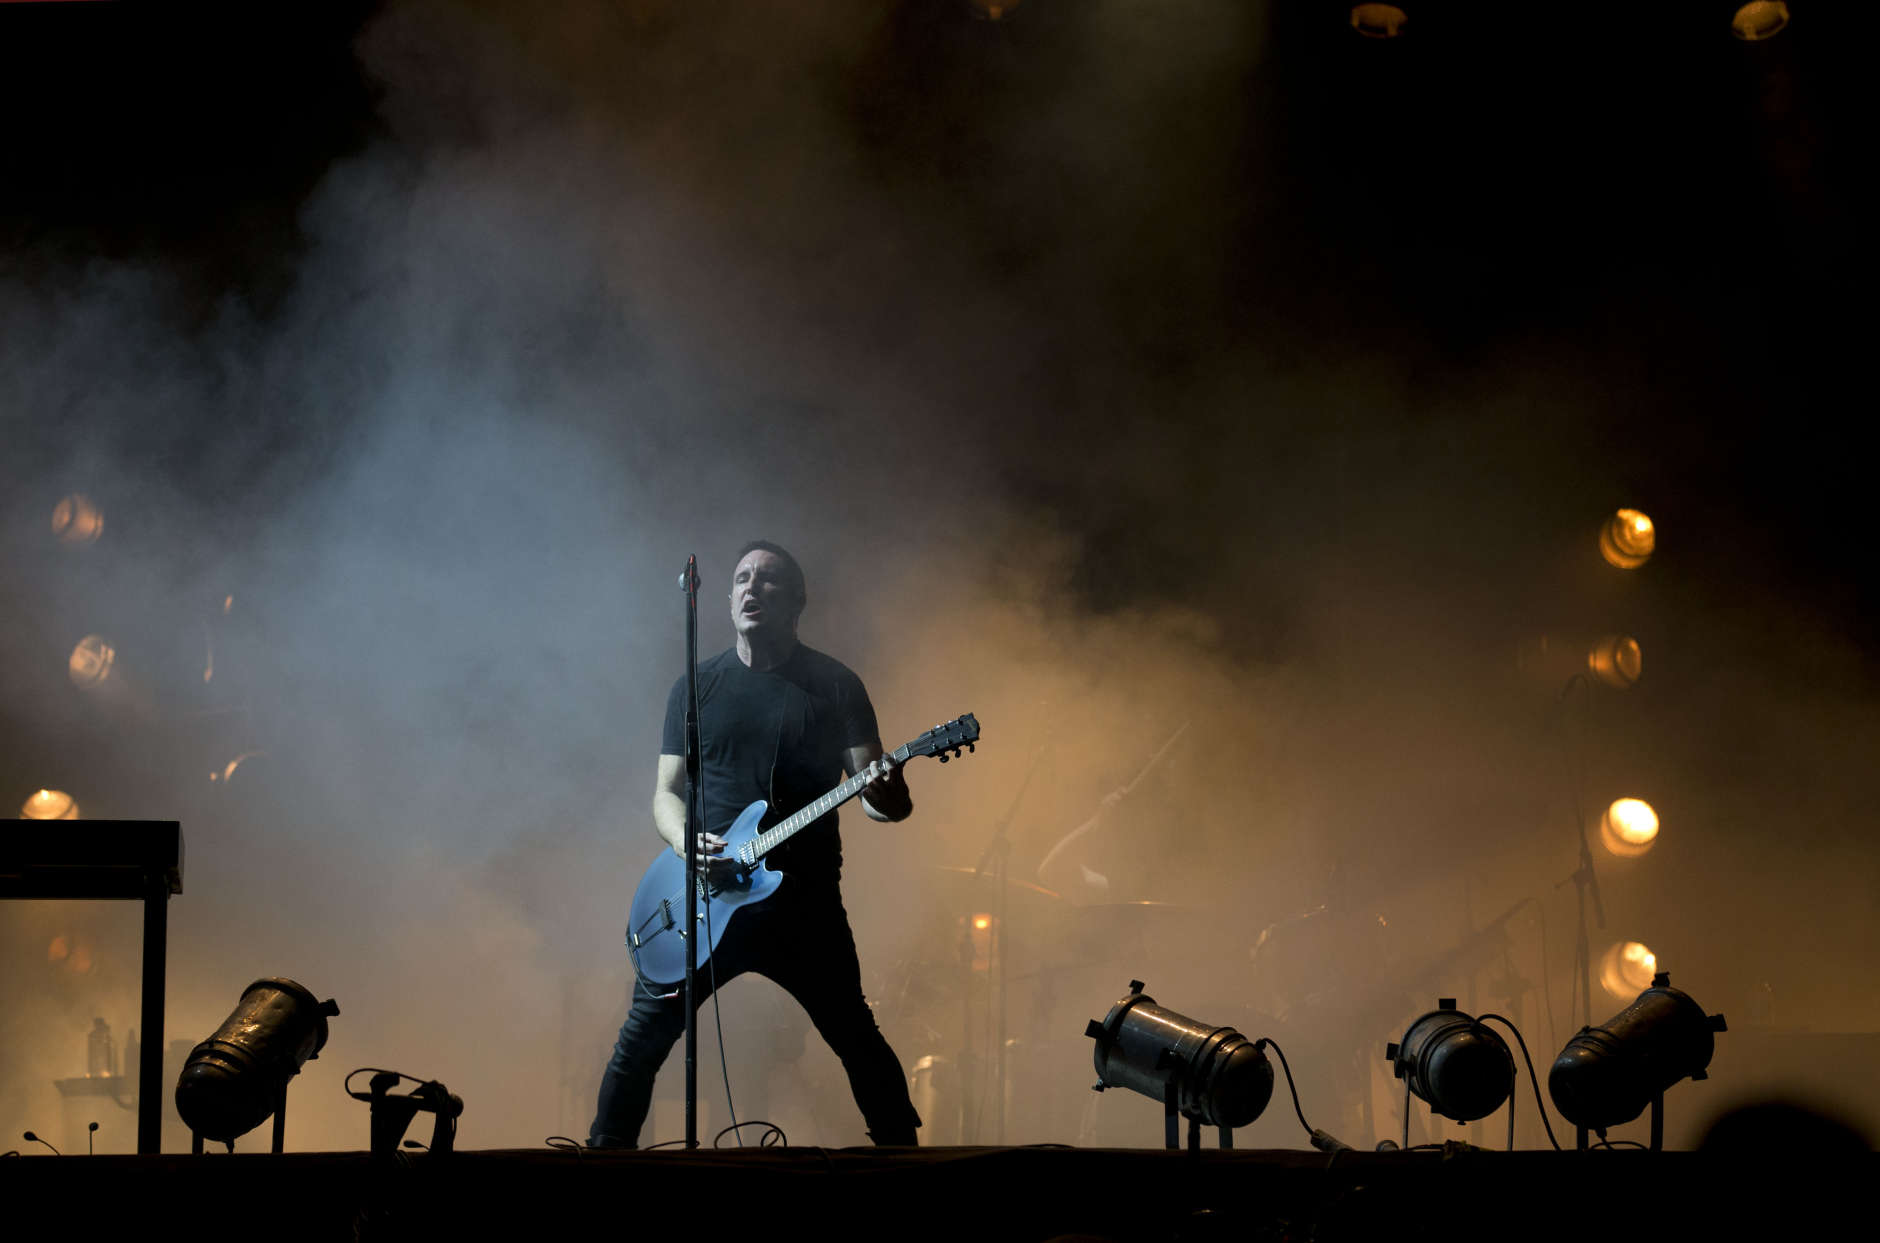 FILE - In this March 27, 2014 file photo, Trent Reznor of Nine Inch Nails performs at the Vive Latino music festival in Mexico City, Mexico. Reznor and his band, Nine Inch Nails, embark on a North America tour co-headlining with Soundgarden, on Saturday, July 19, 2014, in Las Vegas.  (AP Photo/Rebecca Blackwell, file)